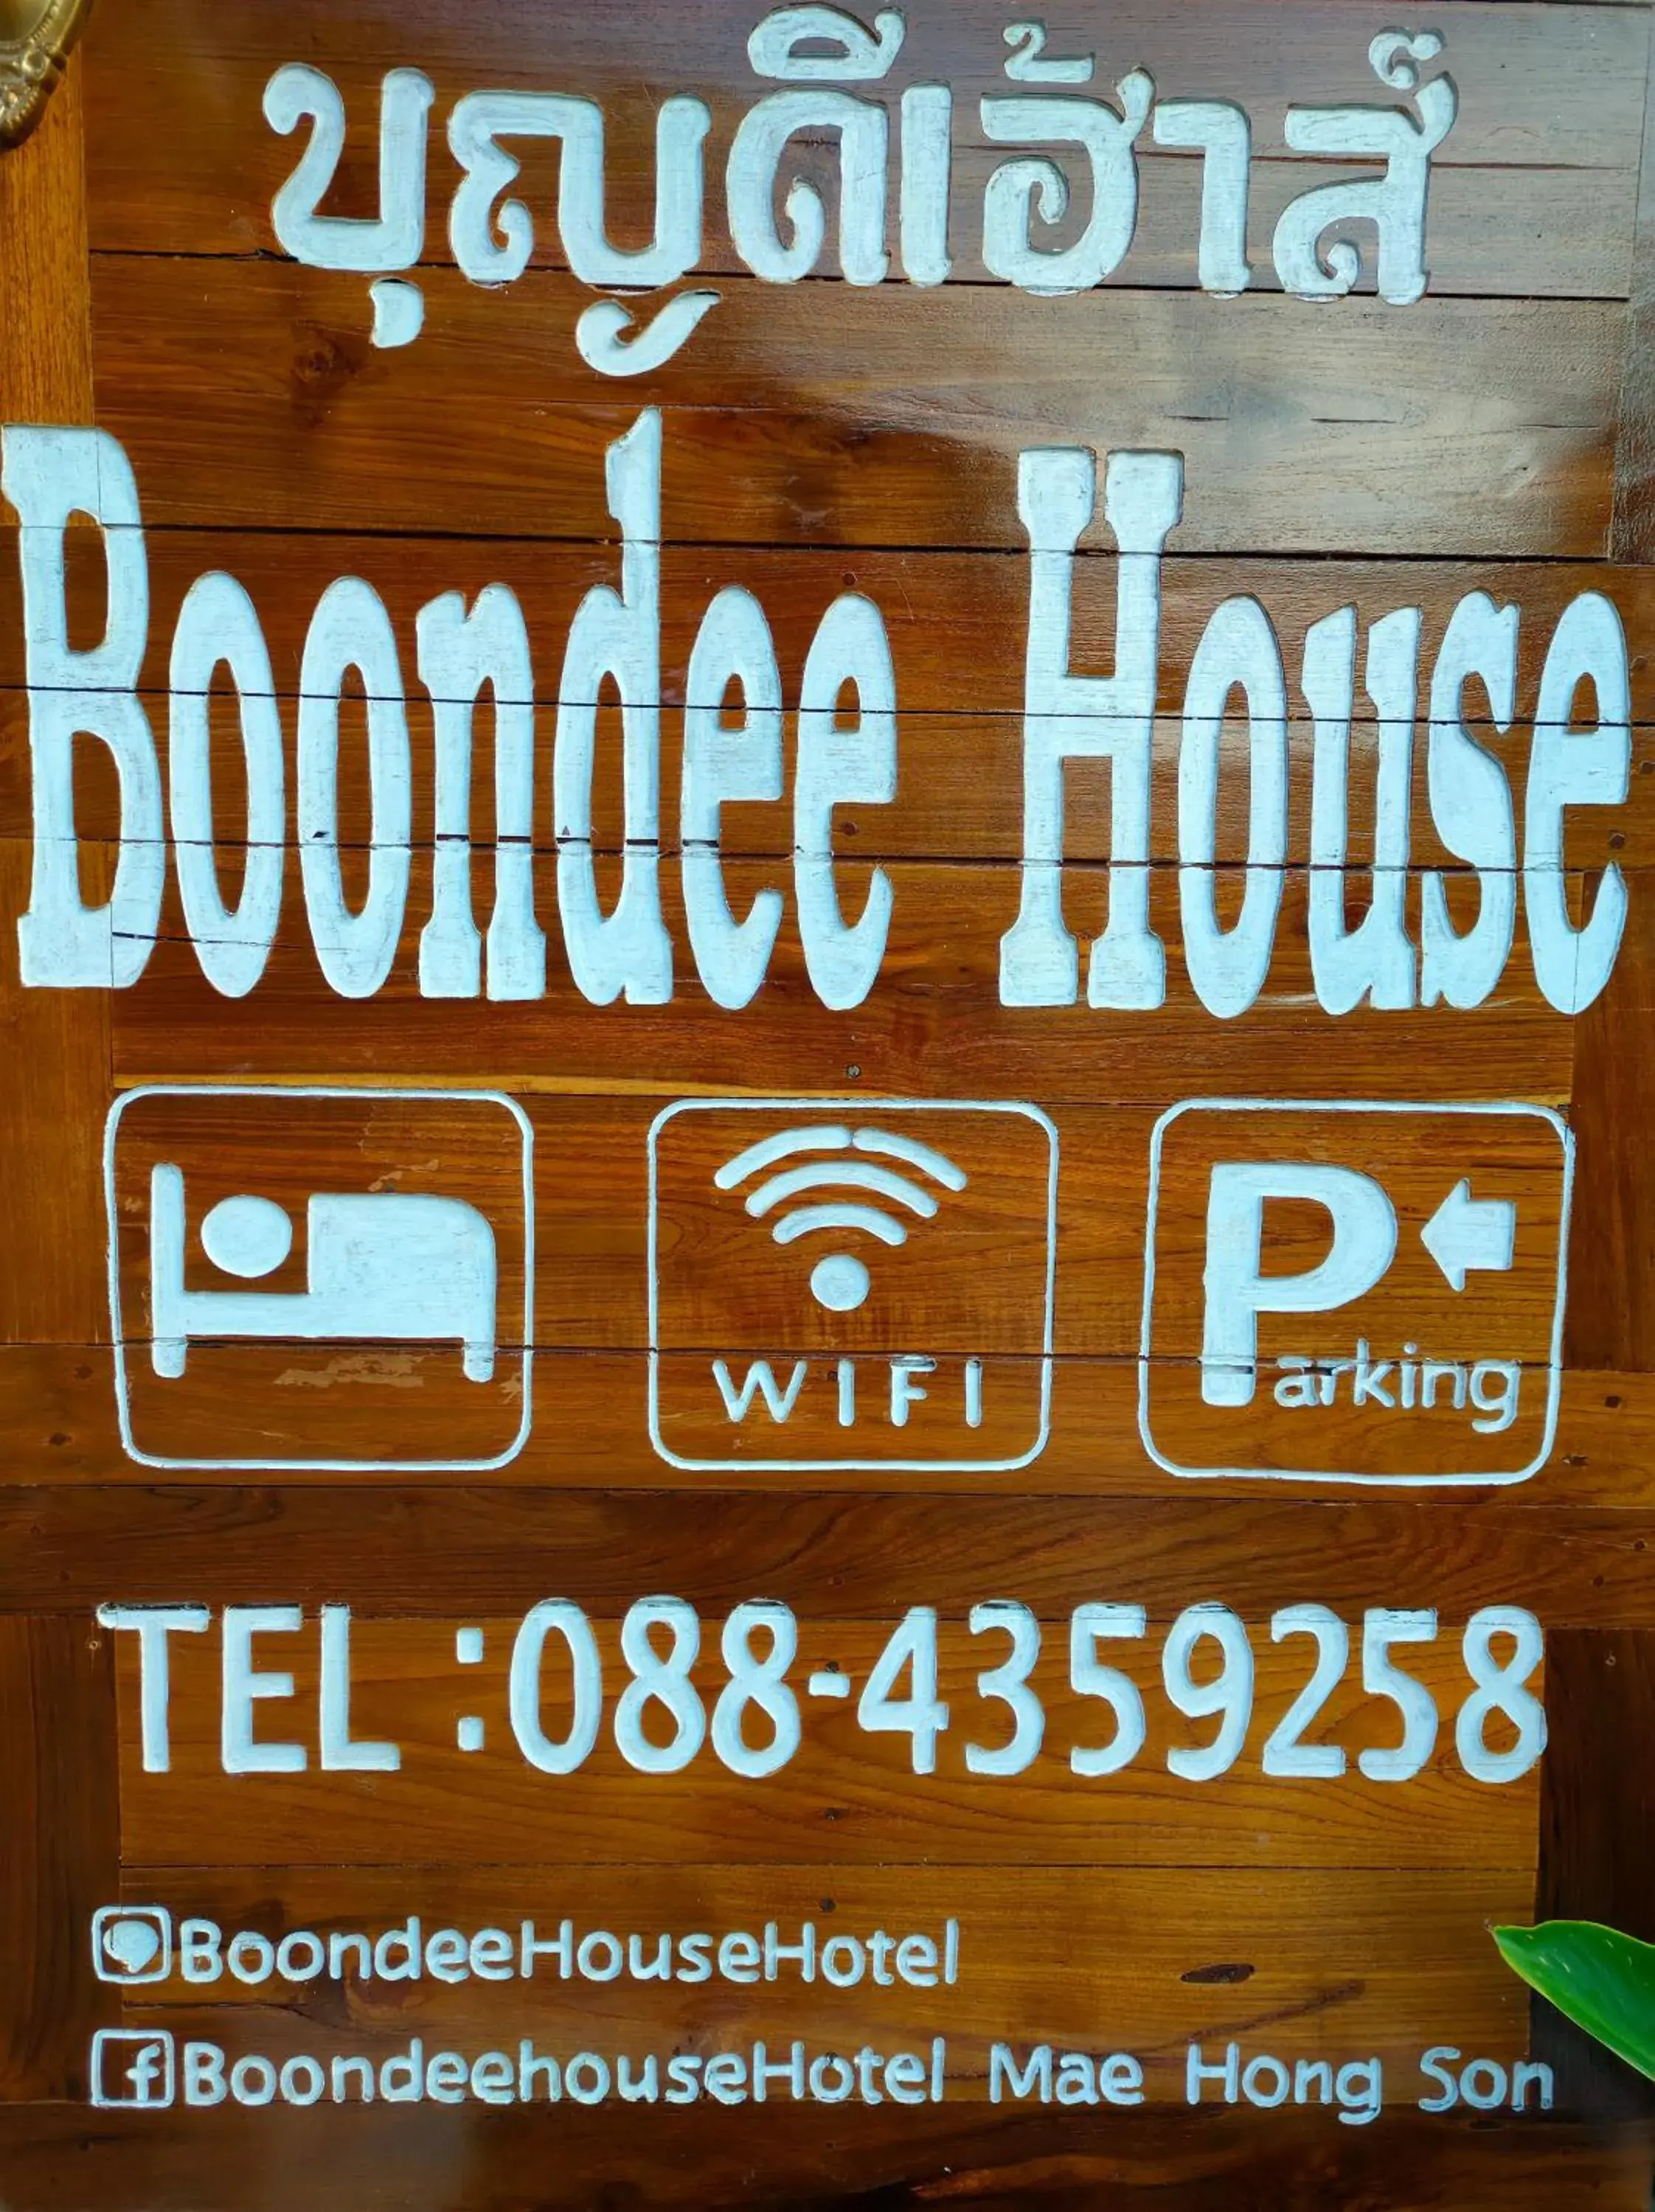 Logo/Certificate/Sign in Boondee House